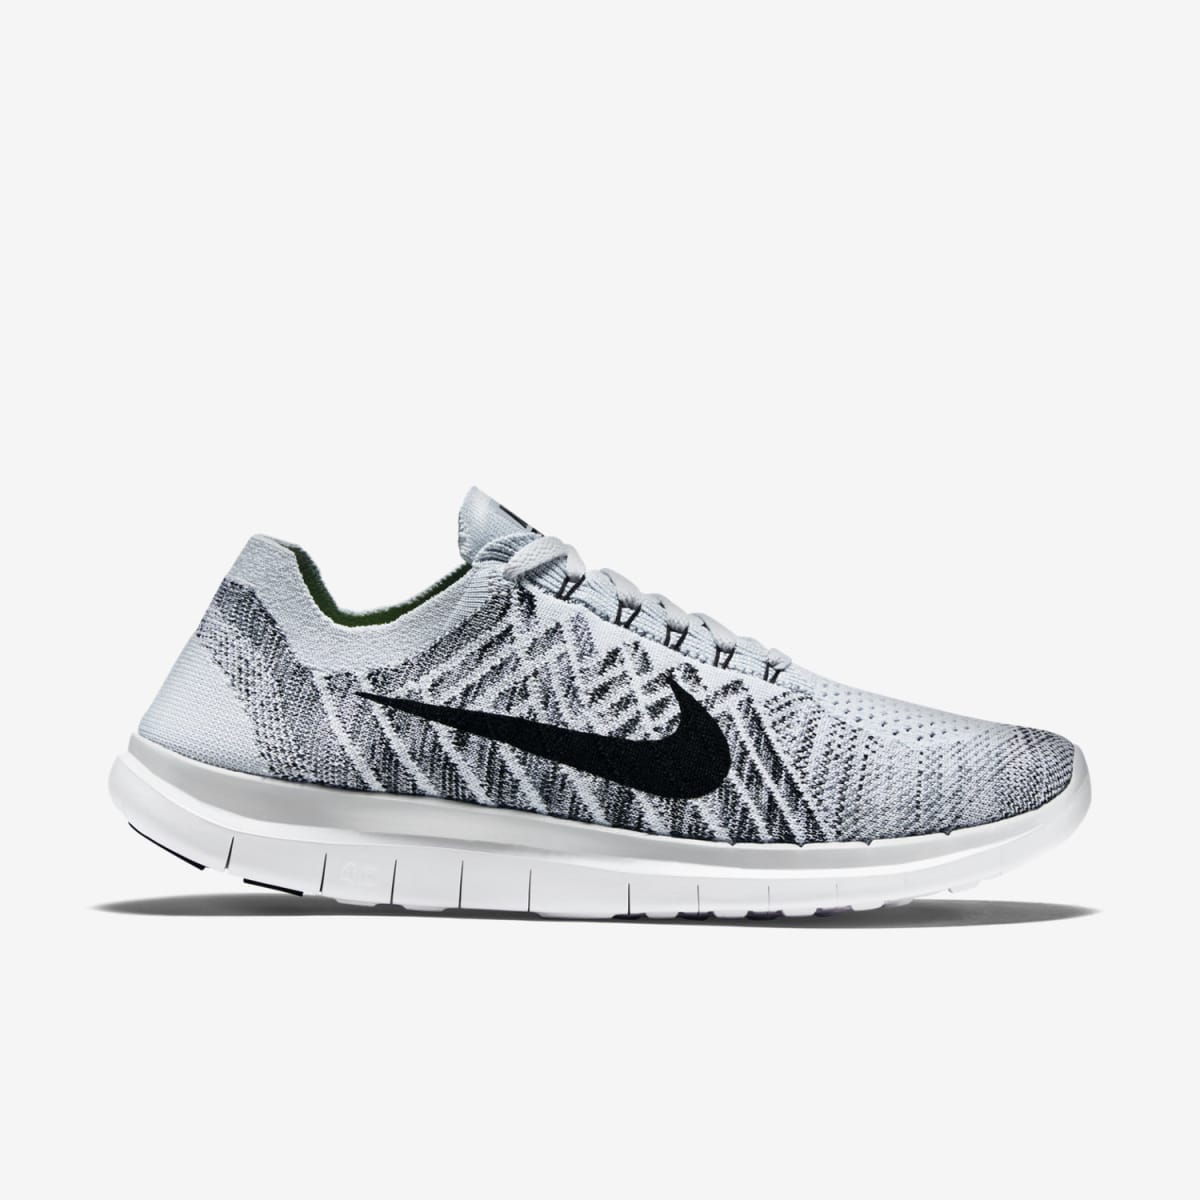 Corrupt kasteel controller Nike Free 4.0 Flyknit | Nike | Sneaker News, Launches, Release Dates,  Collabs & Info